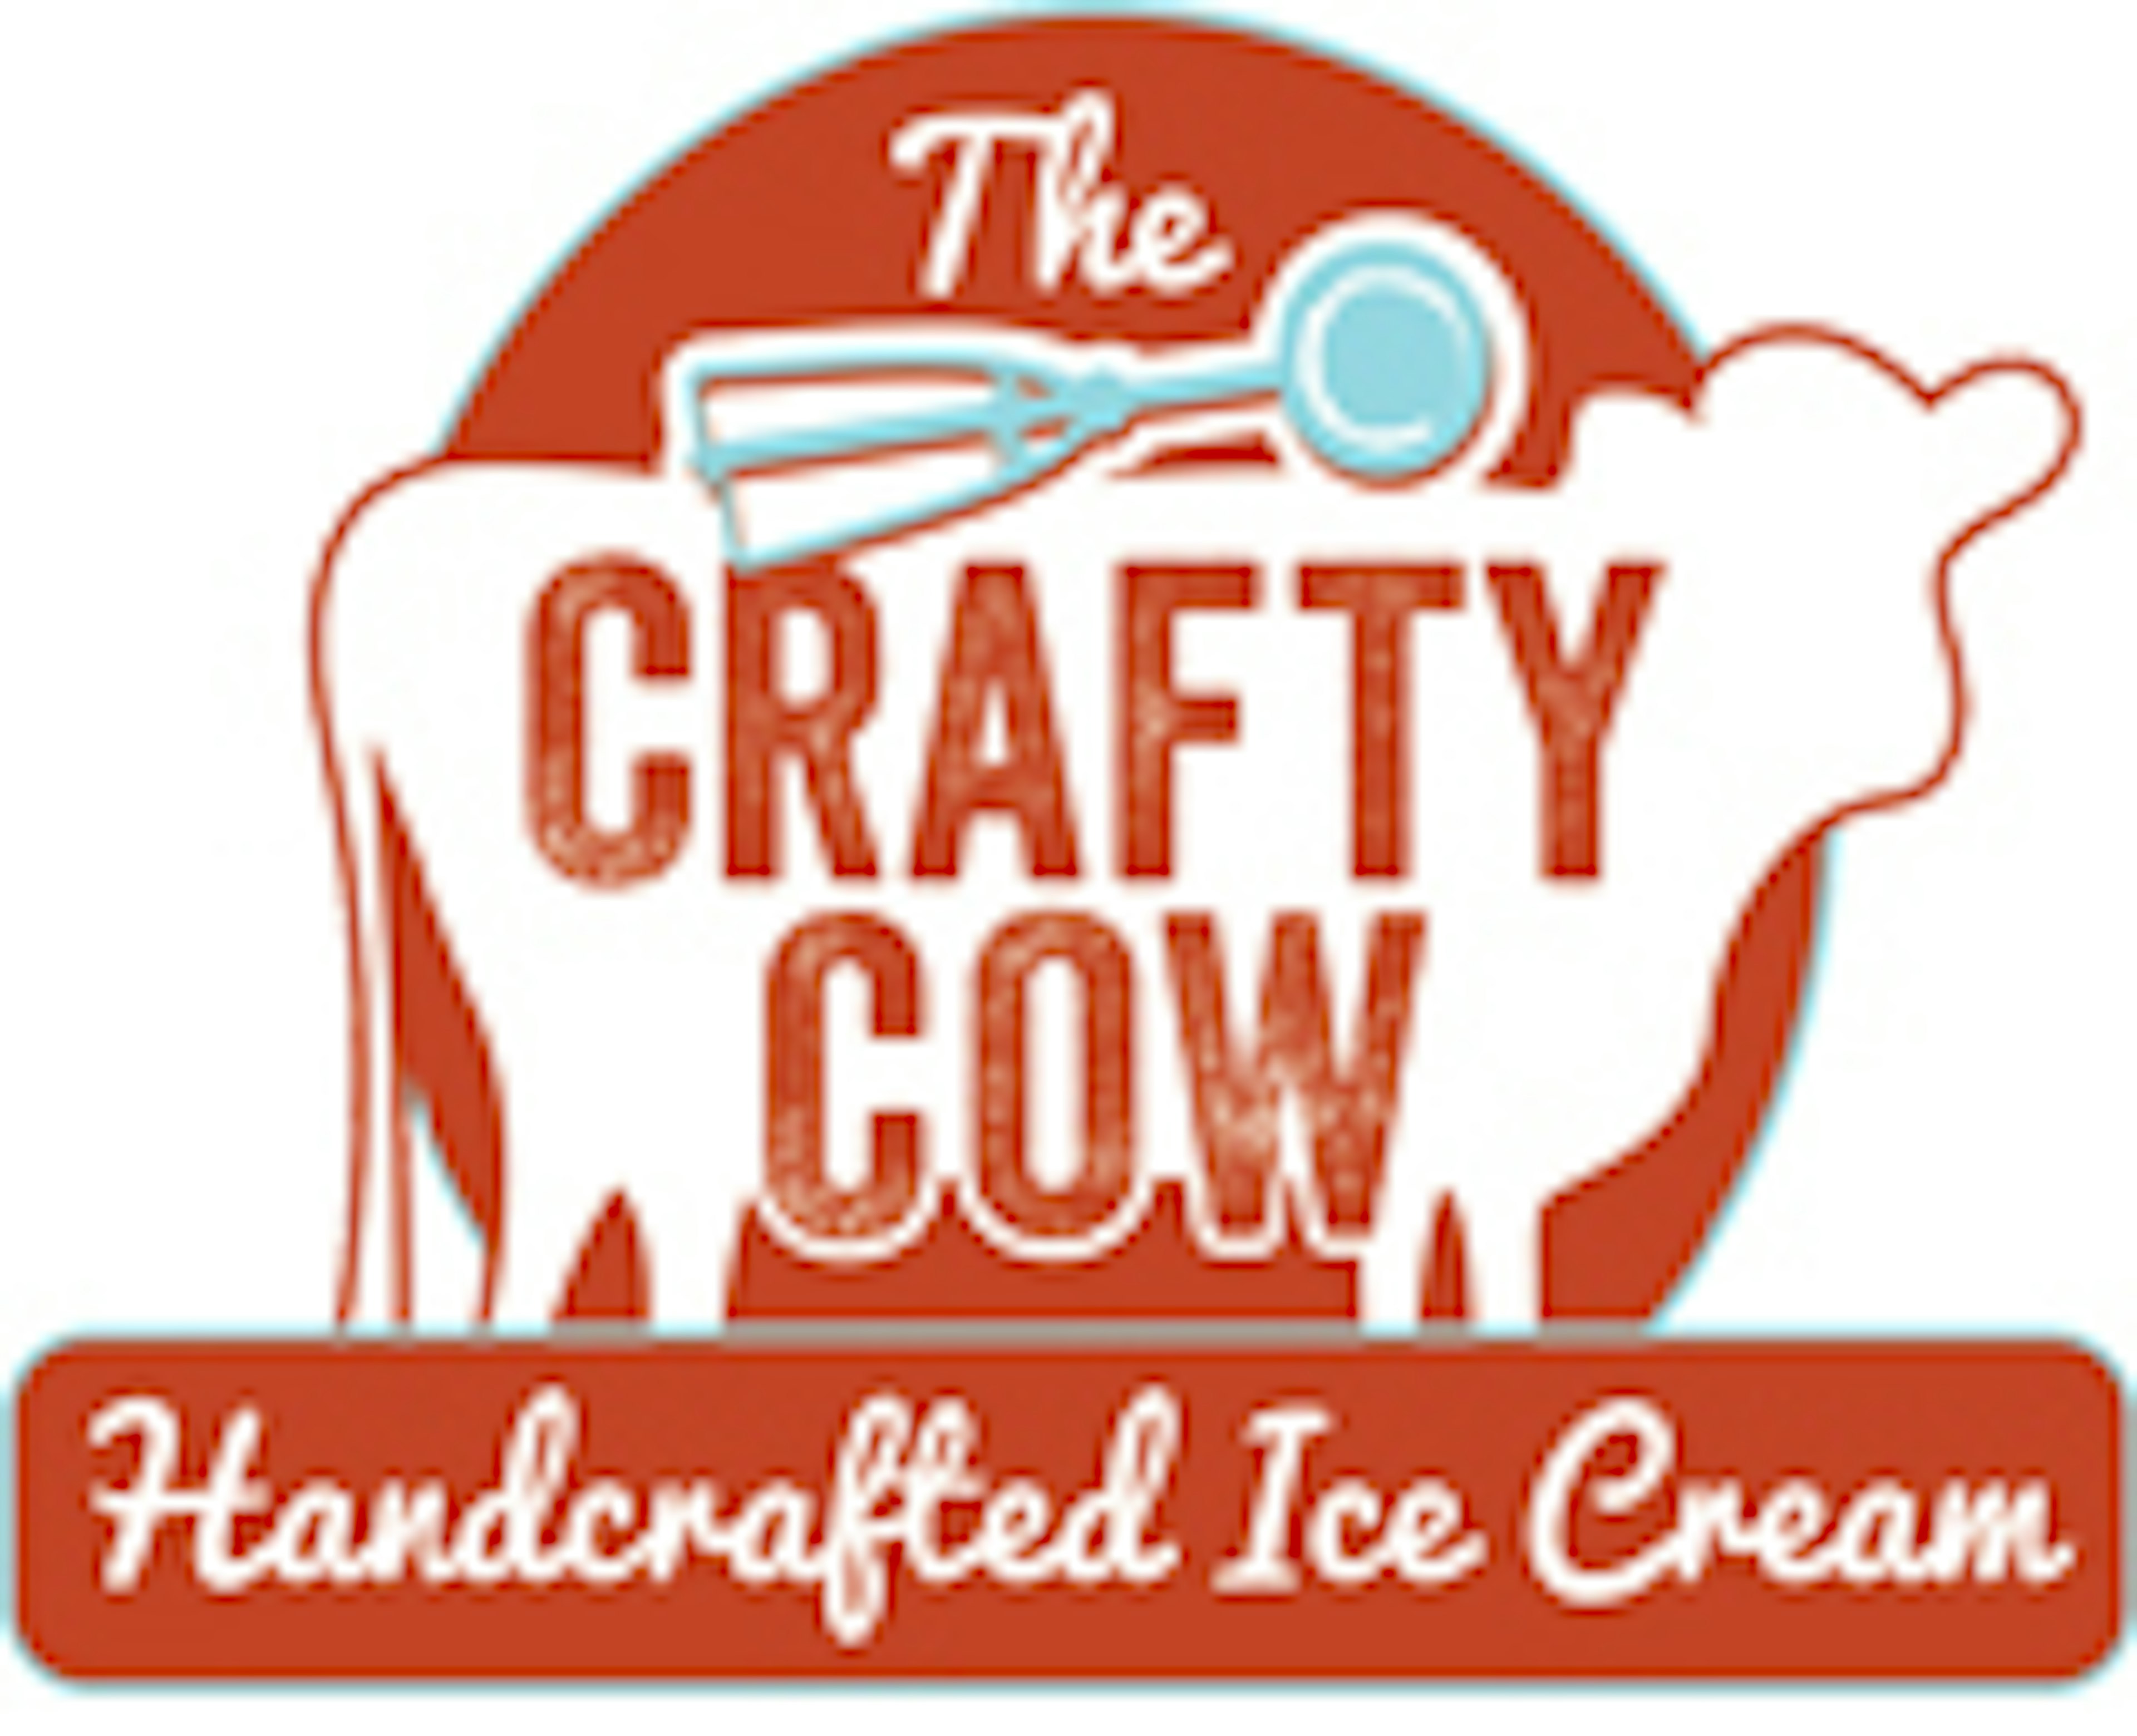 The Crafty Cow Handcrafted Ice Cream